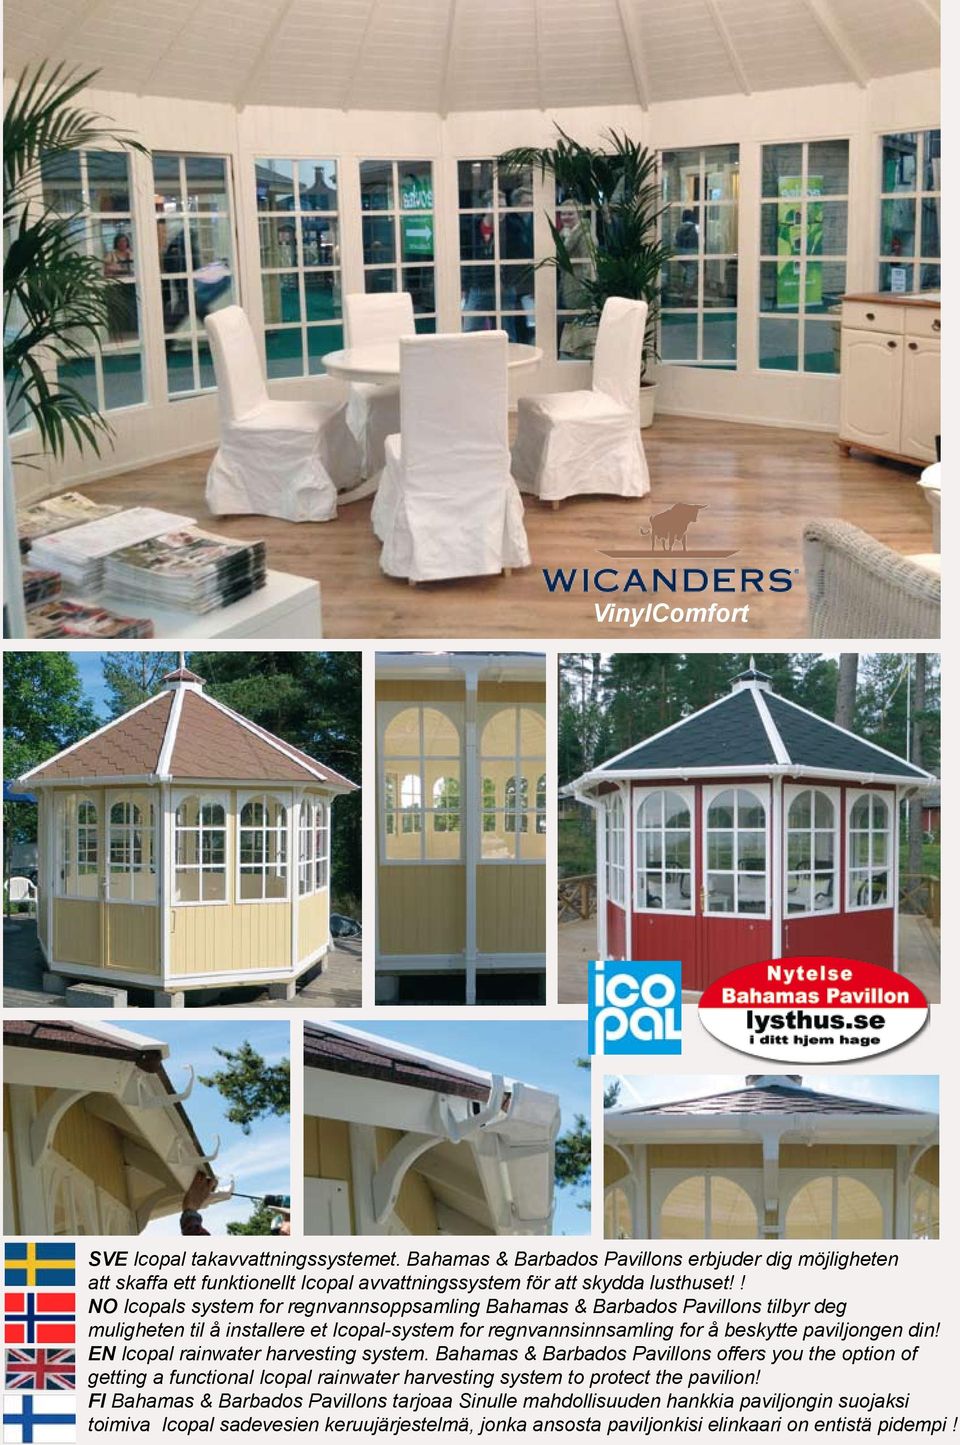 EN Icopal rainwater harvesting system. Bahamas & Barbados Pavillons offers you the option of getting a functional Icopal rainwater harvesting system to protect the pavilion!